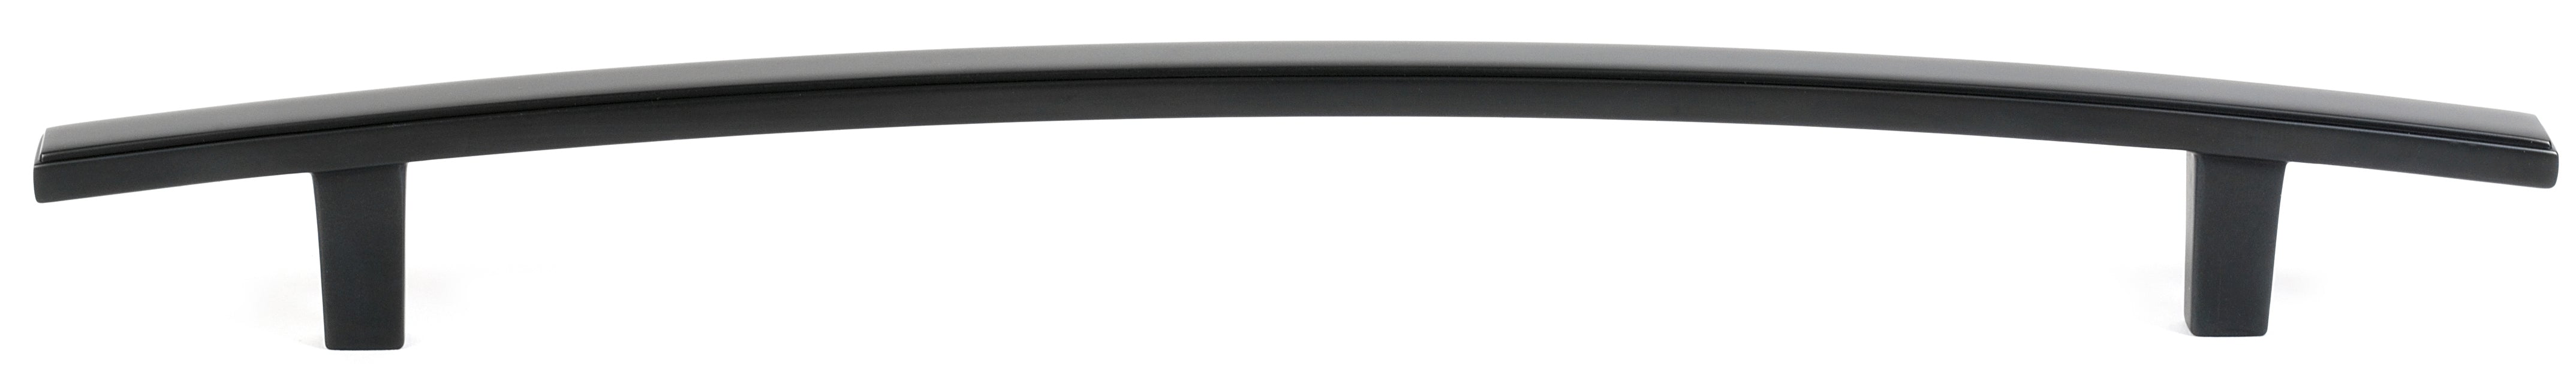 Alno Arch 18" Appliance Pull